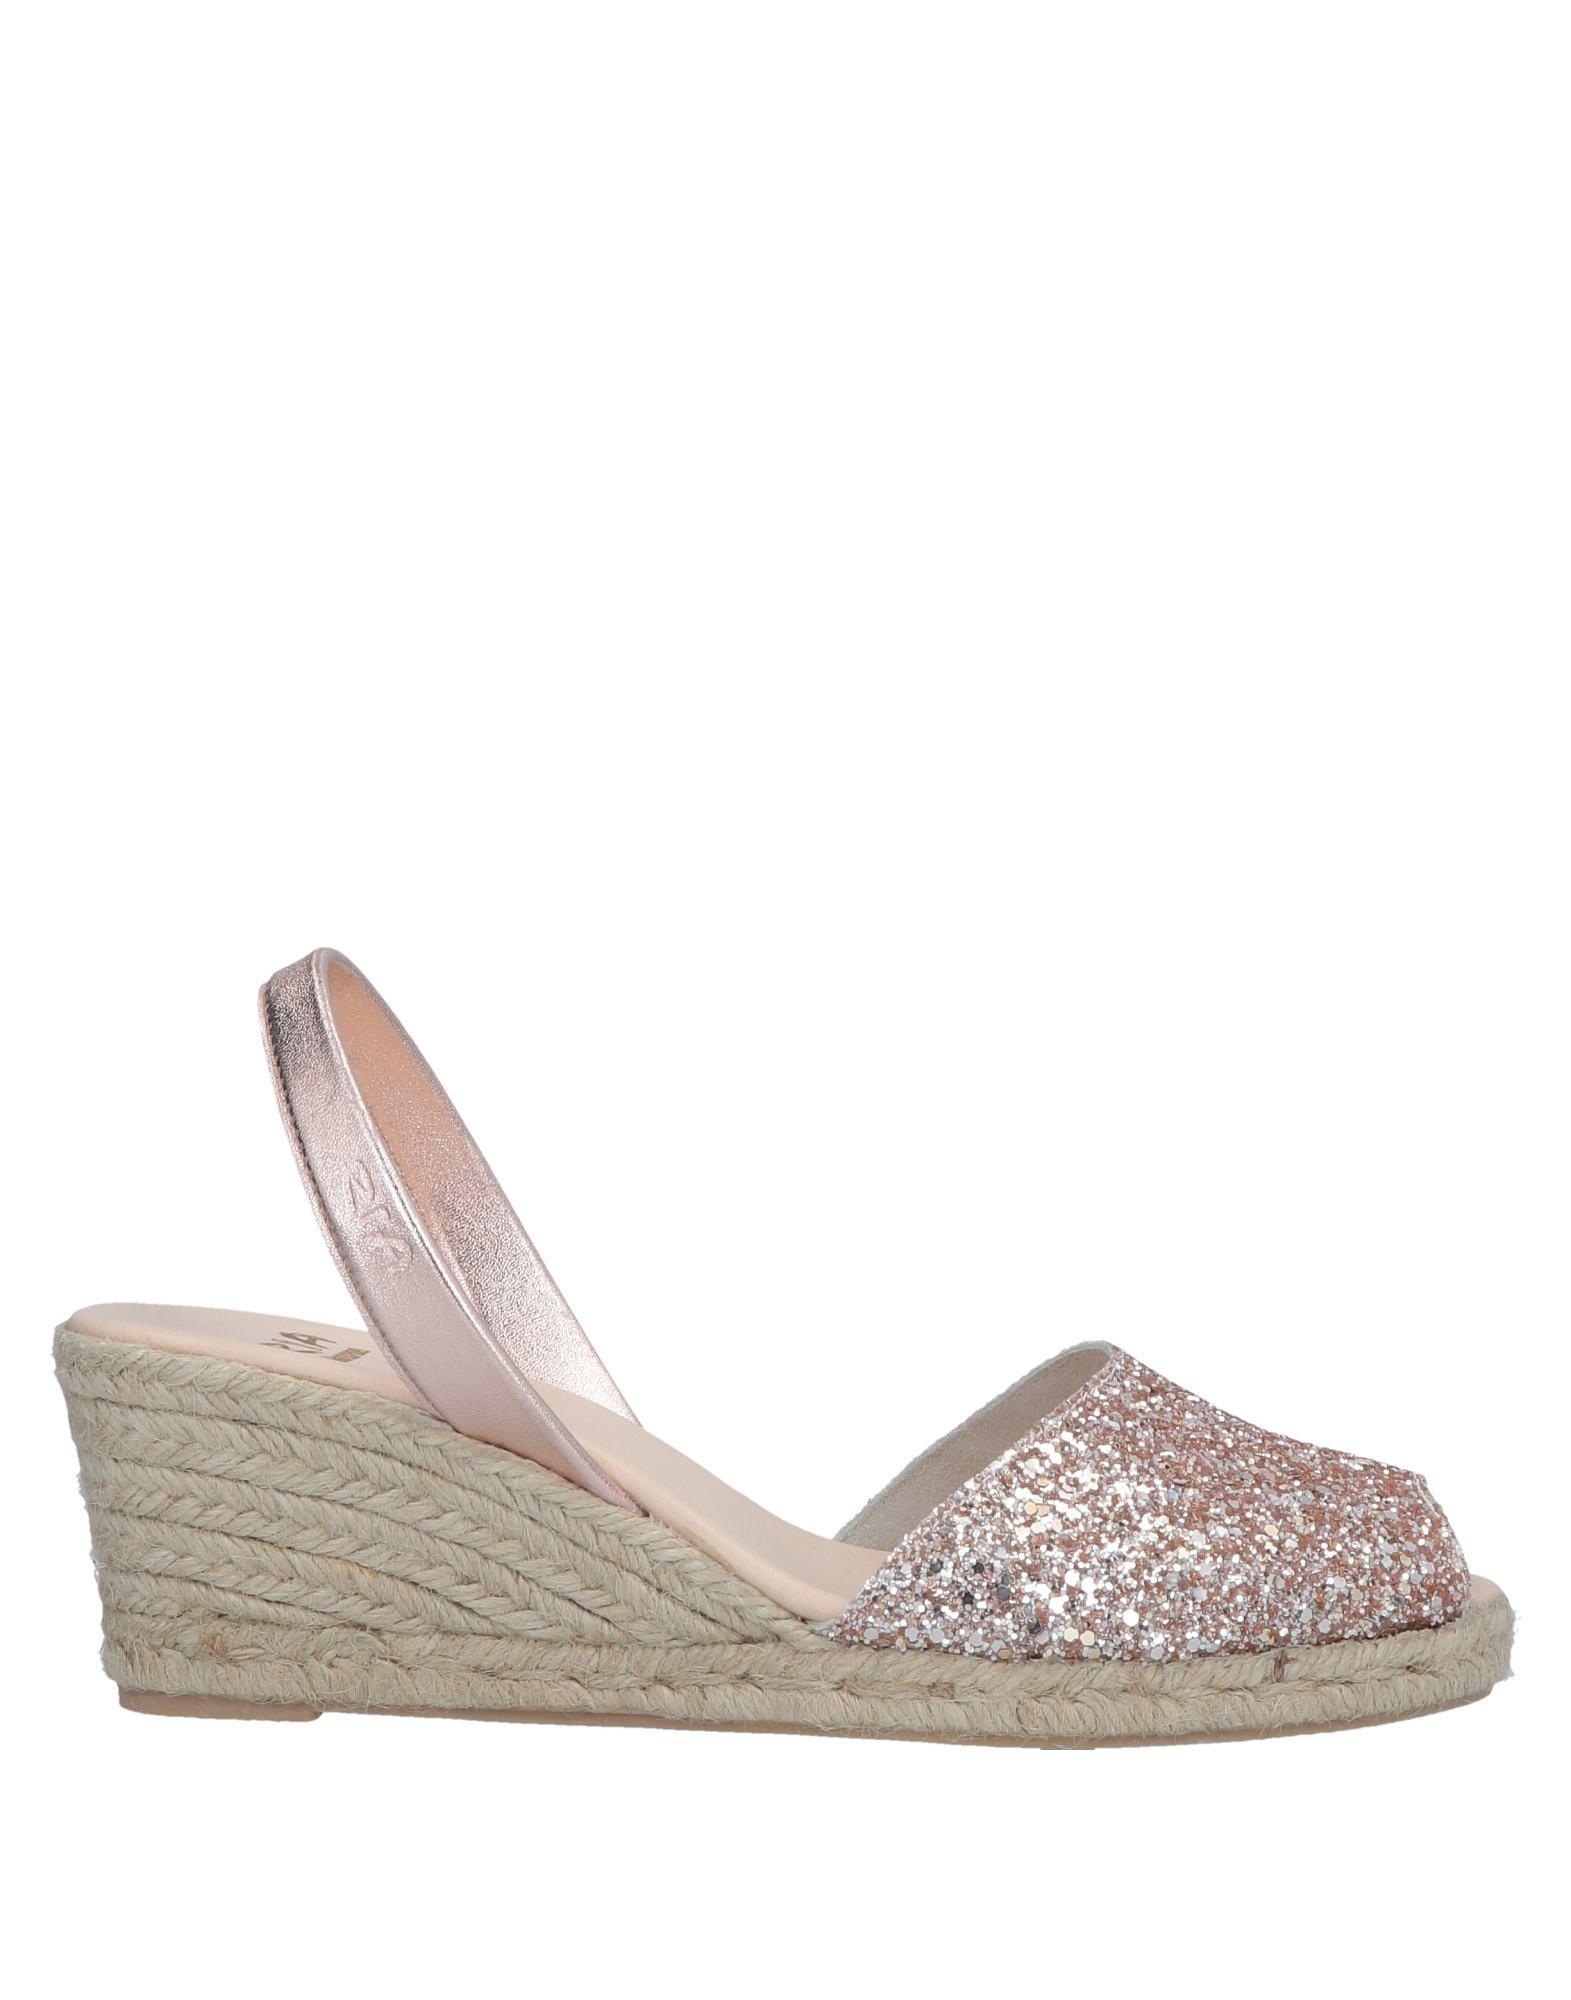 Ria Menorca Leather Espadrilles in Light Pink (Pink) - Lyst